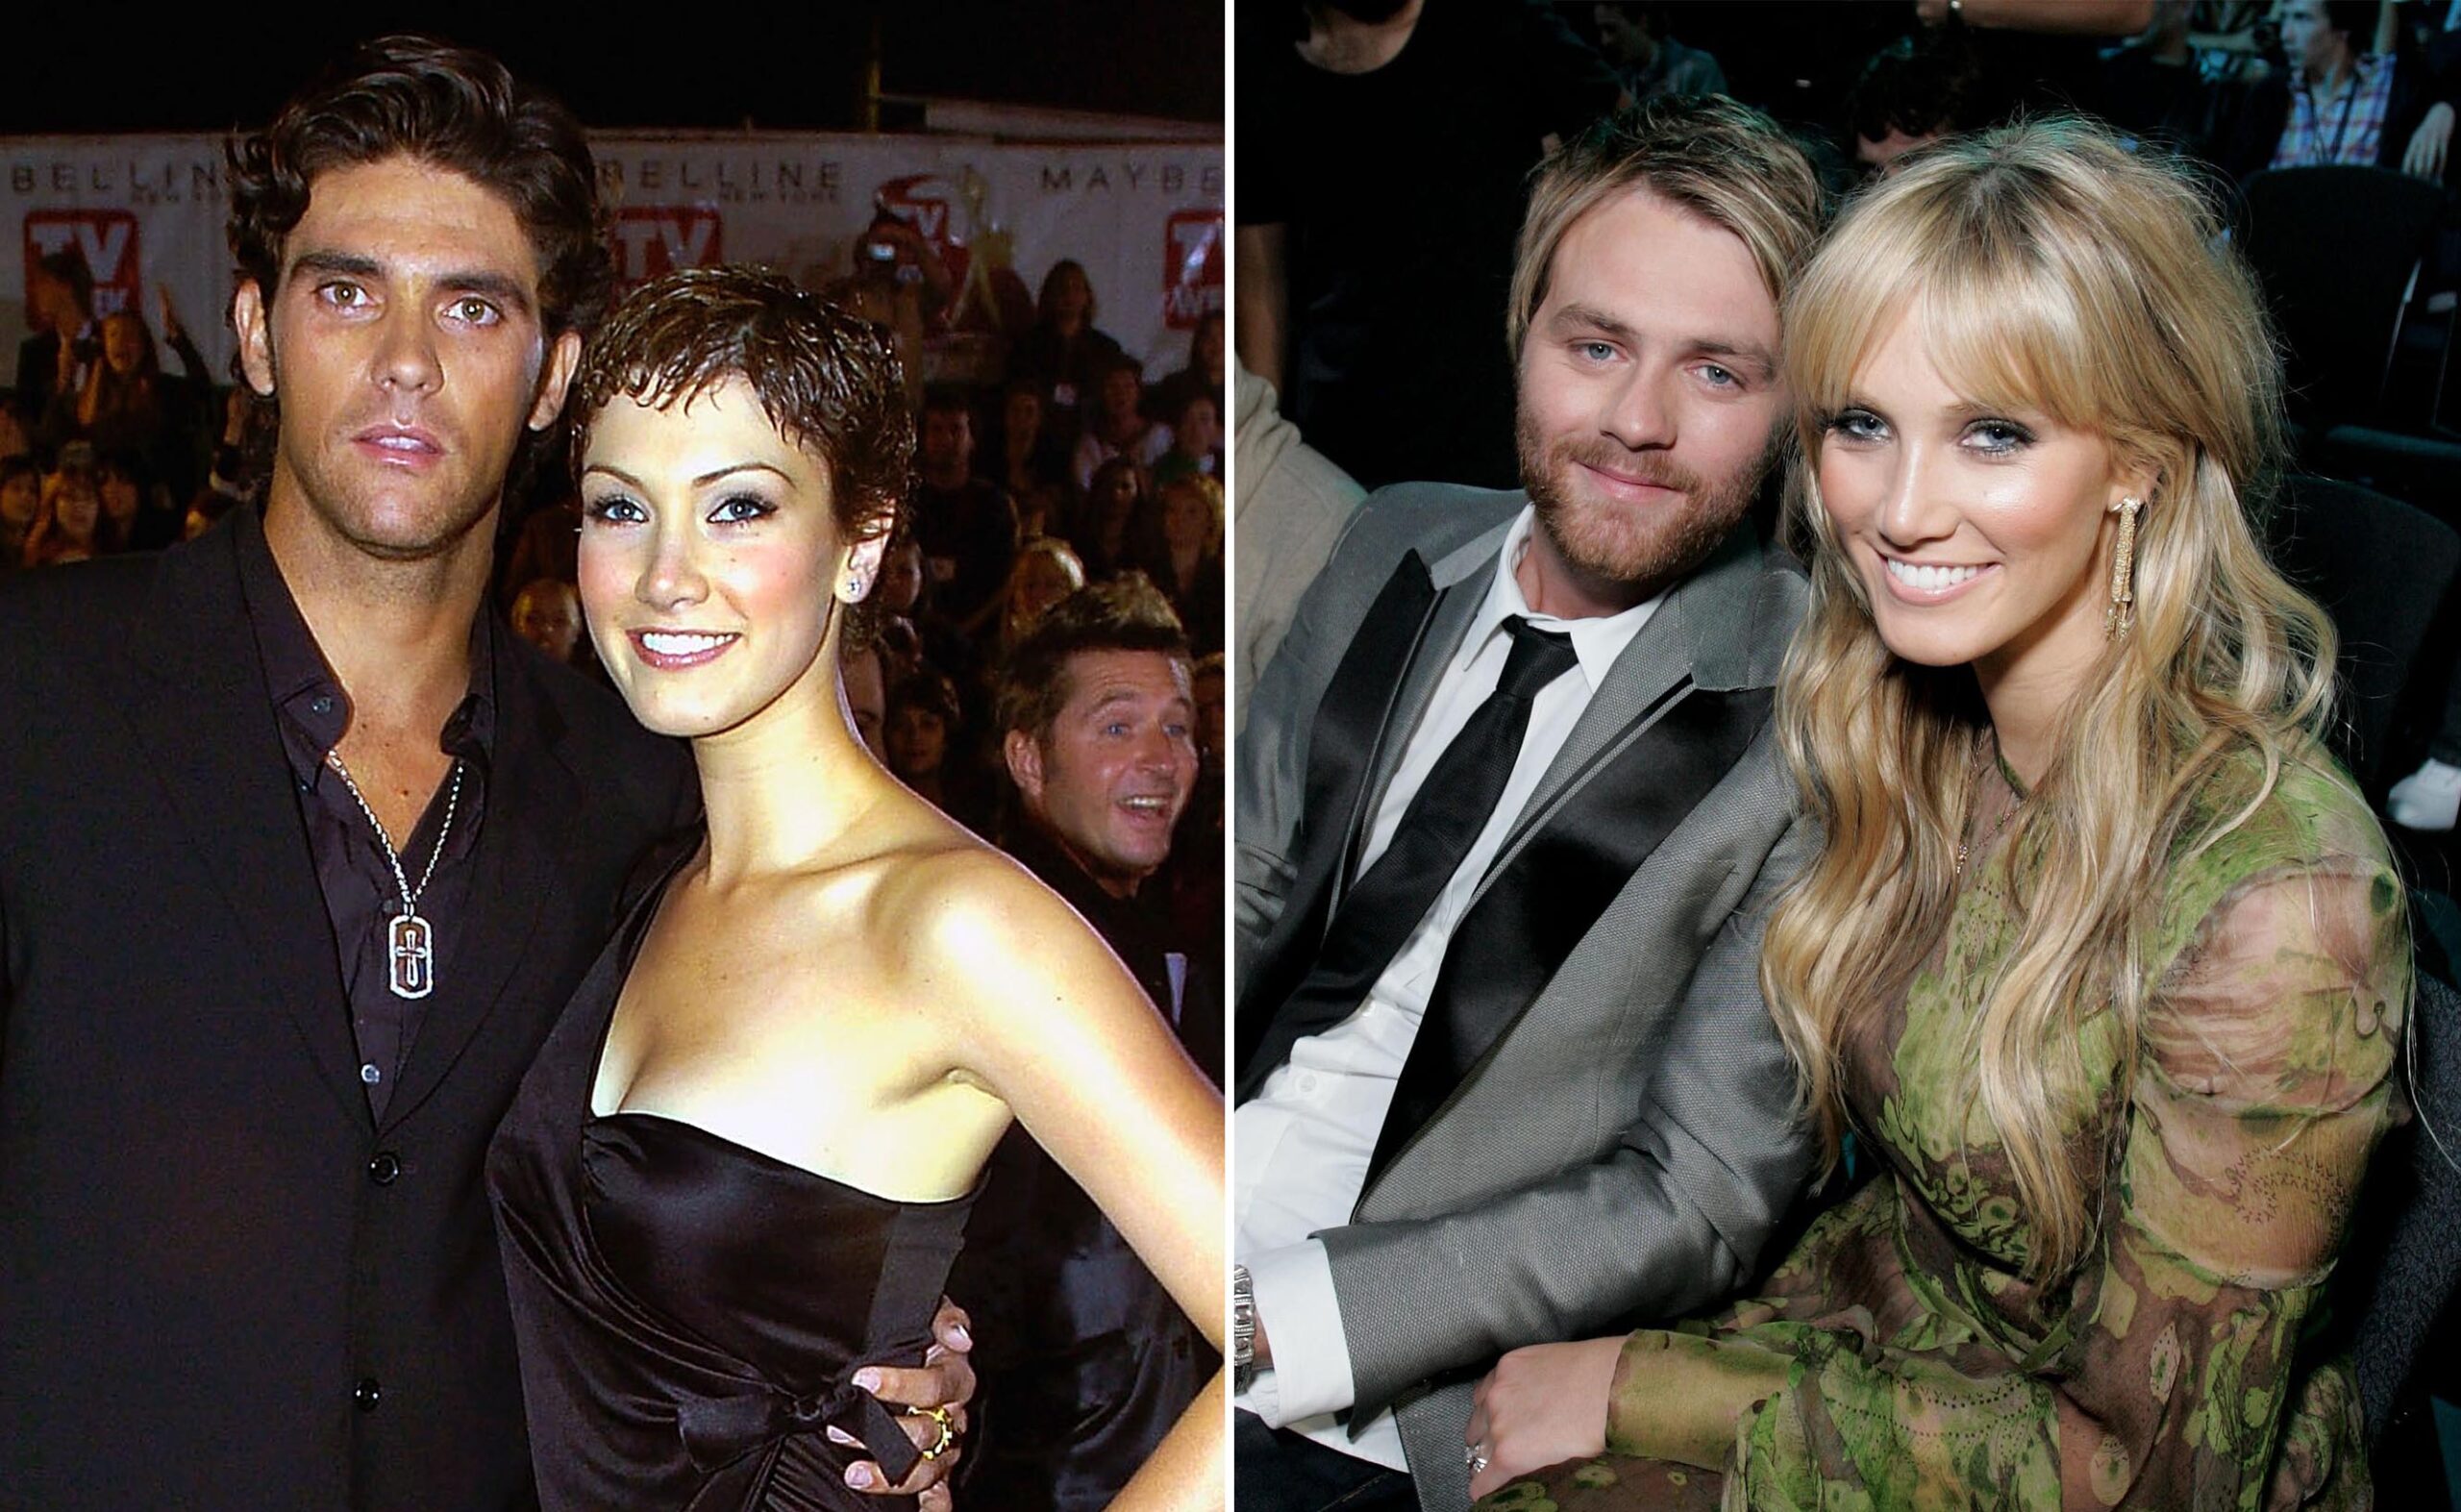 A definitive guide to Delta Goodrem’s past relationships – from boy band heartthrobs to tennis legends